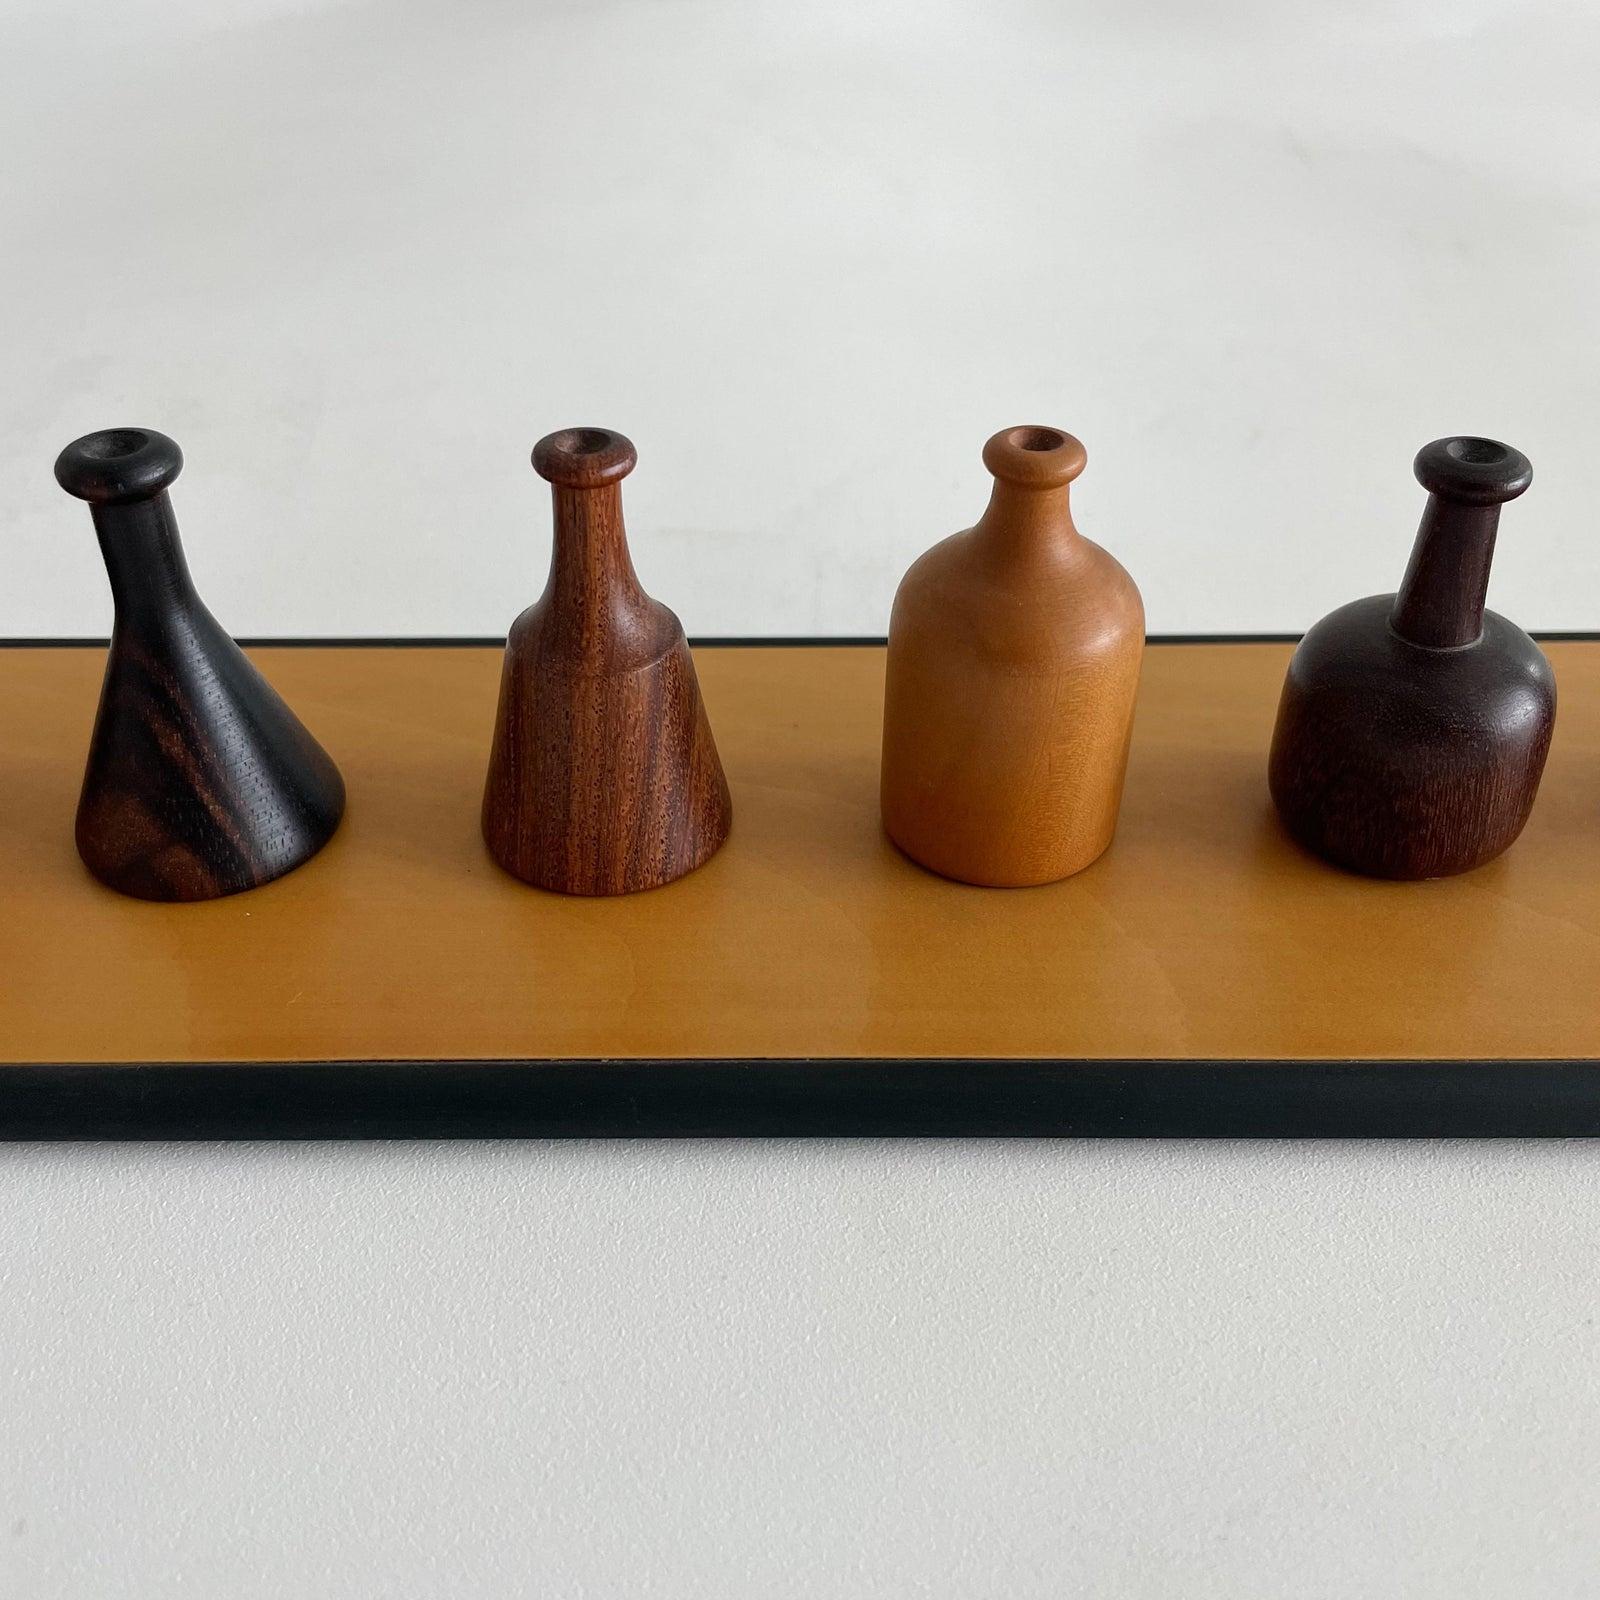 Giorgio Pizzitutti Exotic Wood Miniature Vases Sculpture Italy 1980's For Sale 1